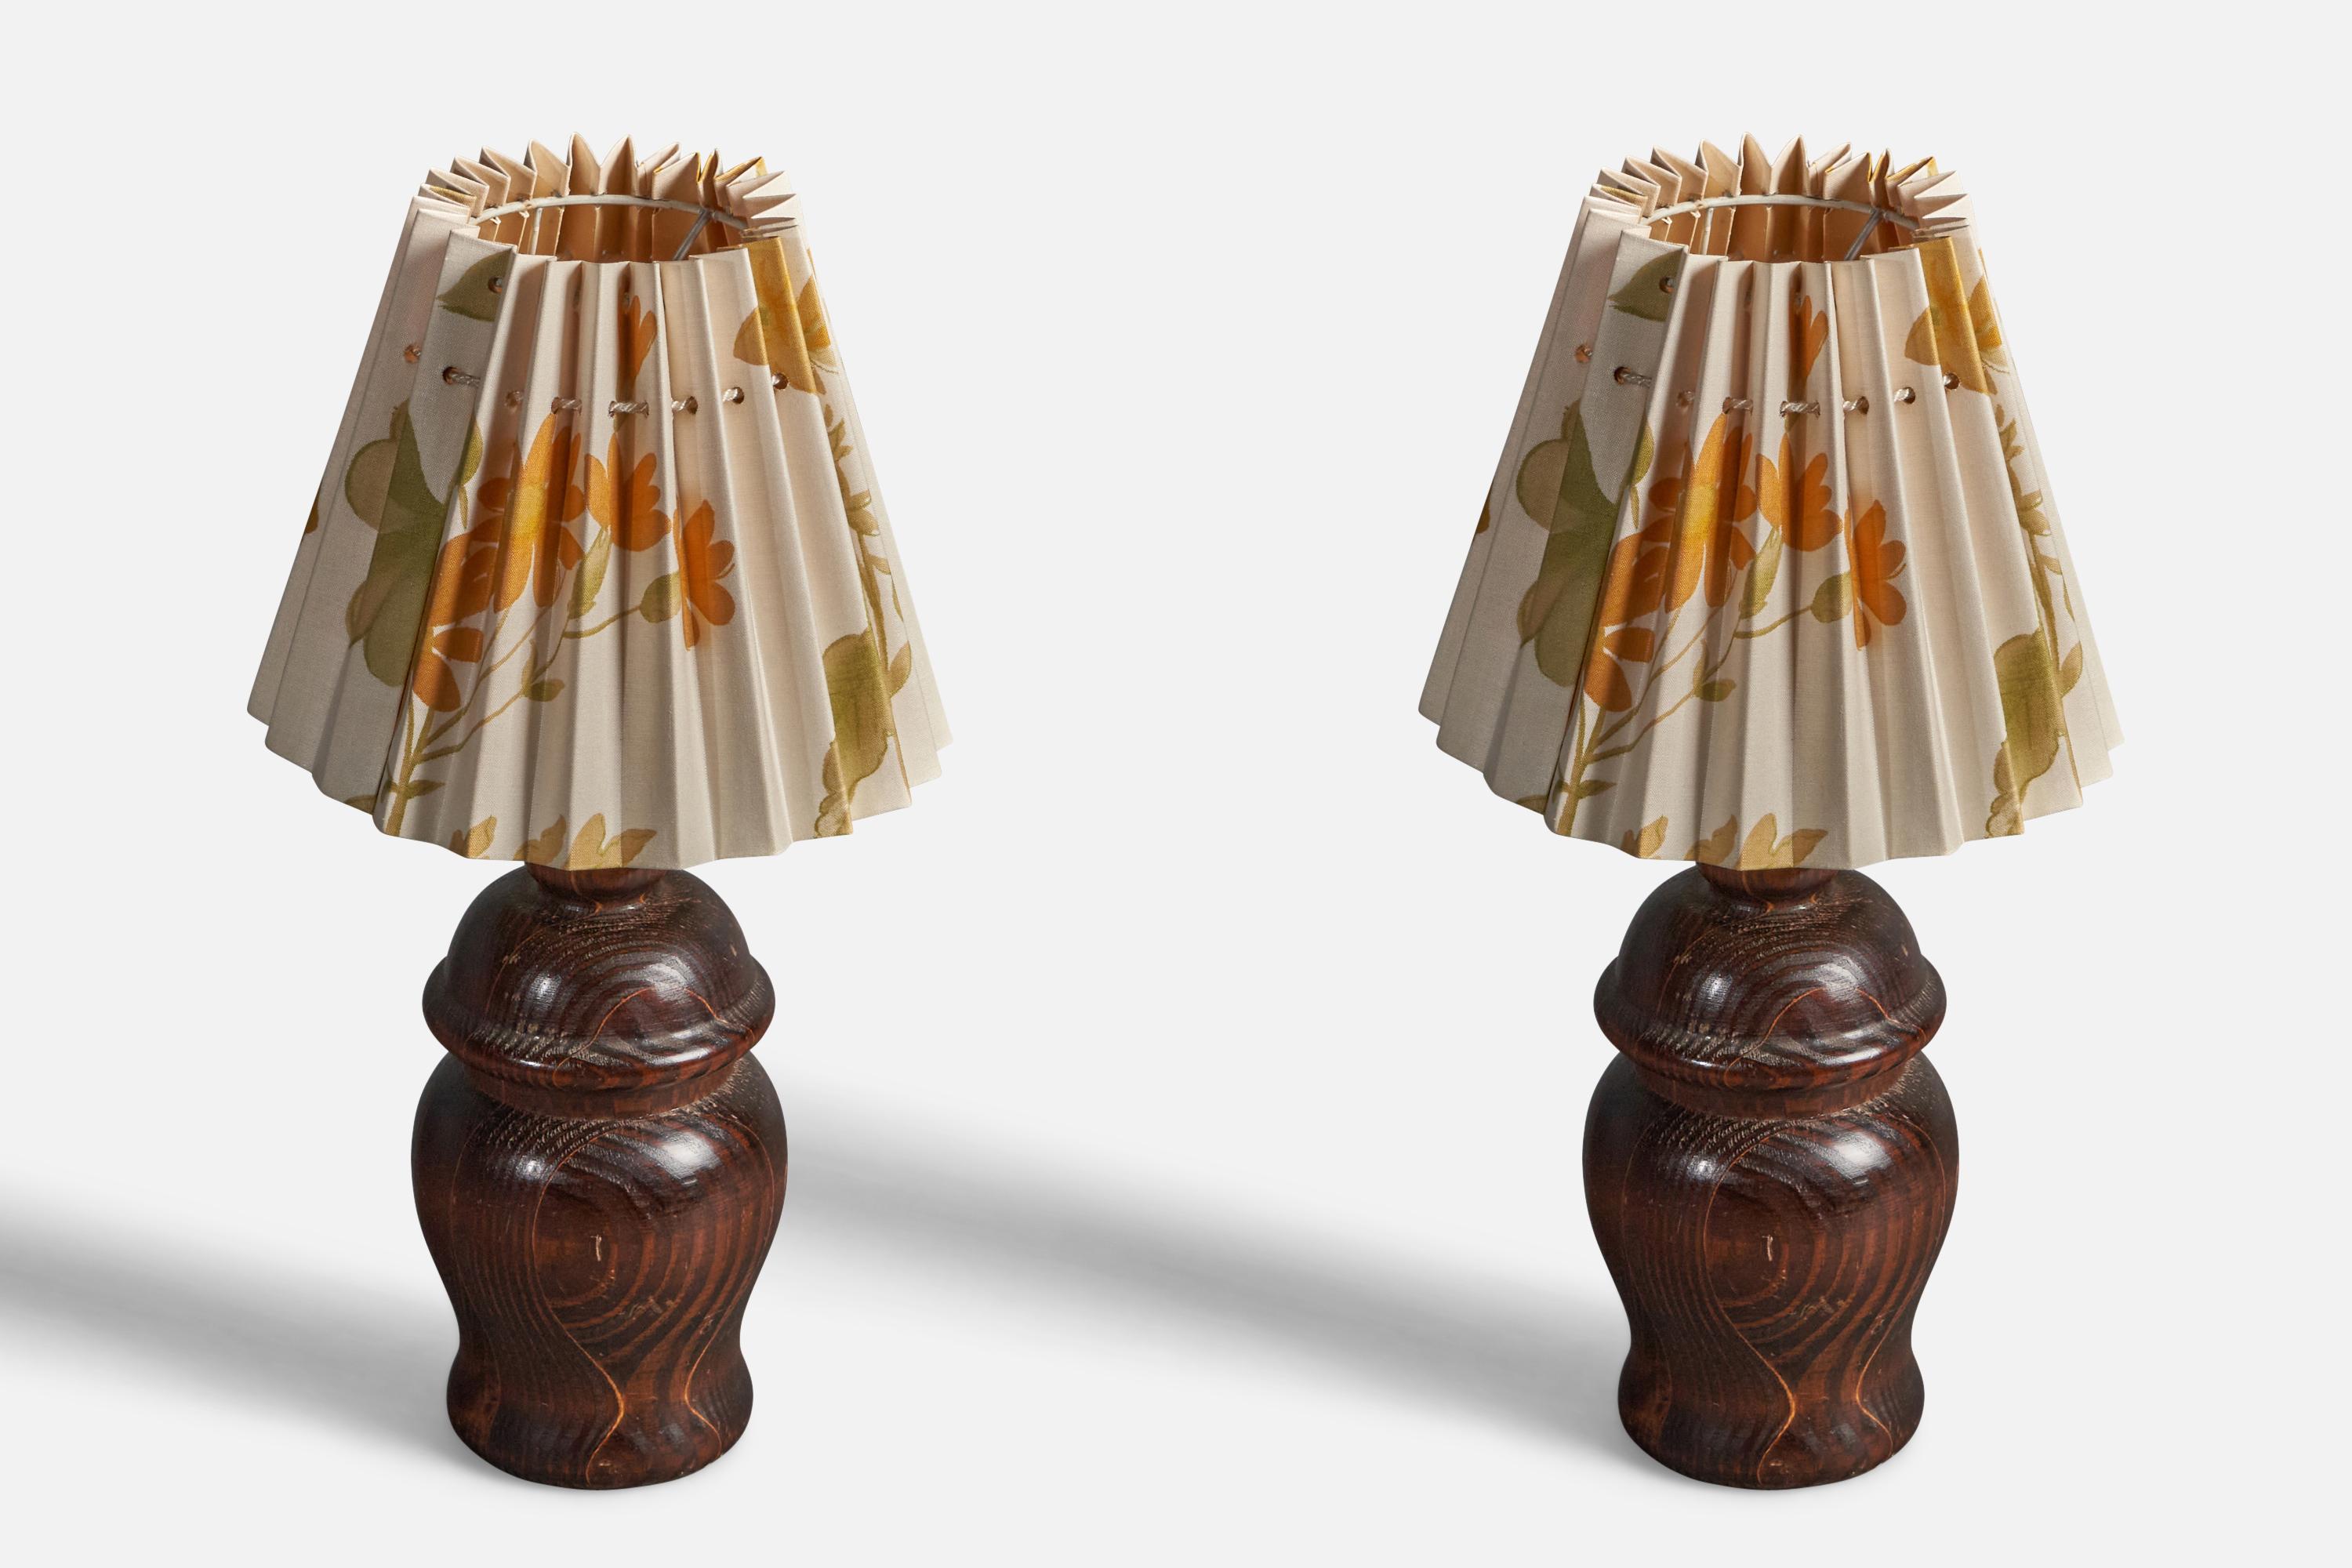 A pair of table lamps. In turned solid dark-stained pine. By unknown studio craftsman.

Sold without lampshade. Stated dimensions excluding bulbs and lampshade. Height includes socket.

Other designers of the period include Alexandre Knoll,